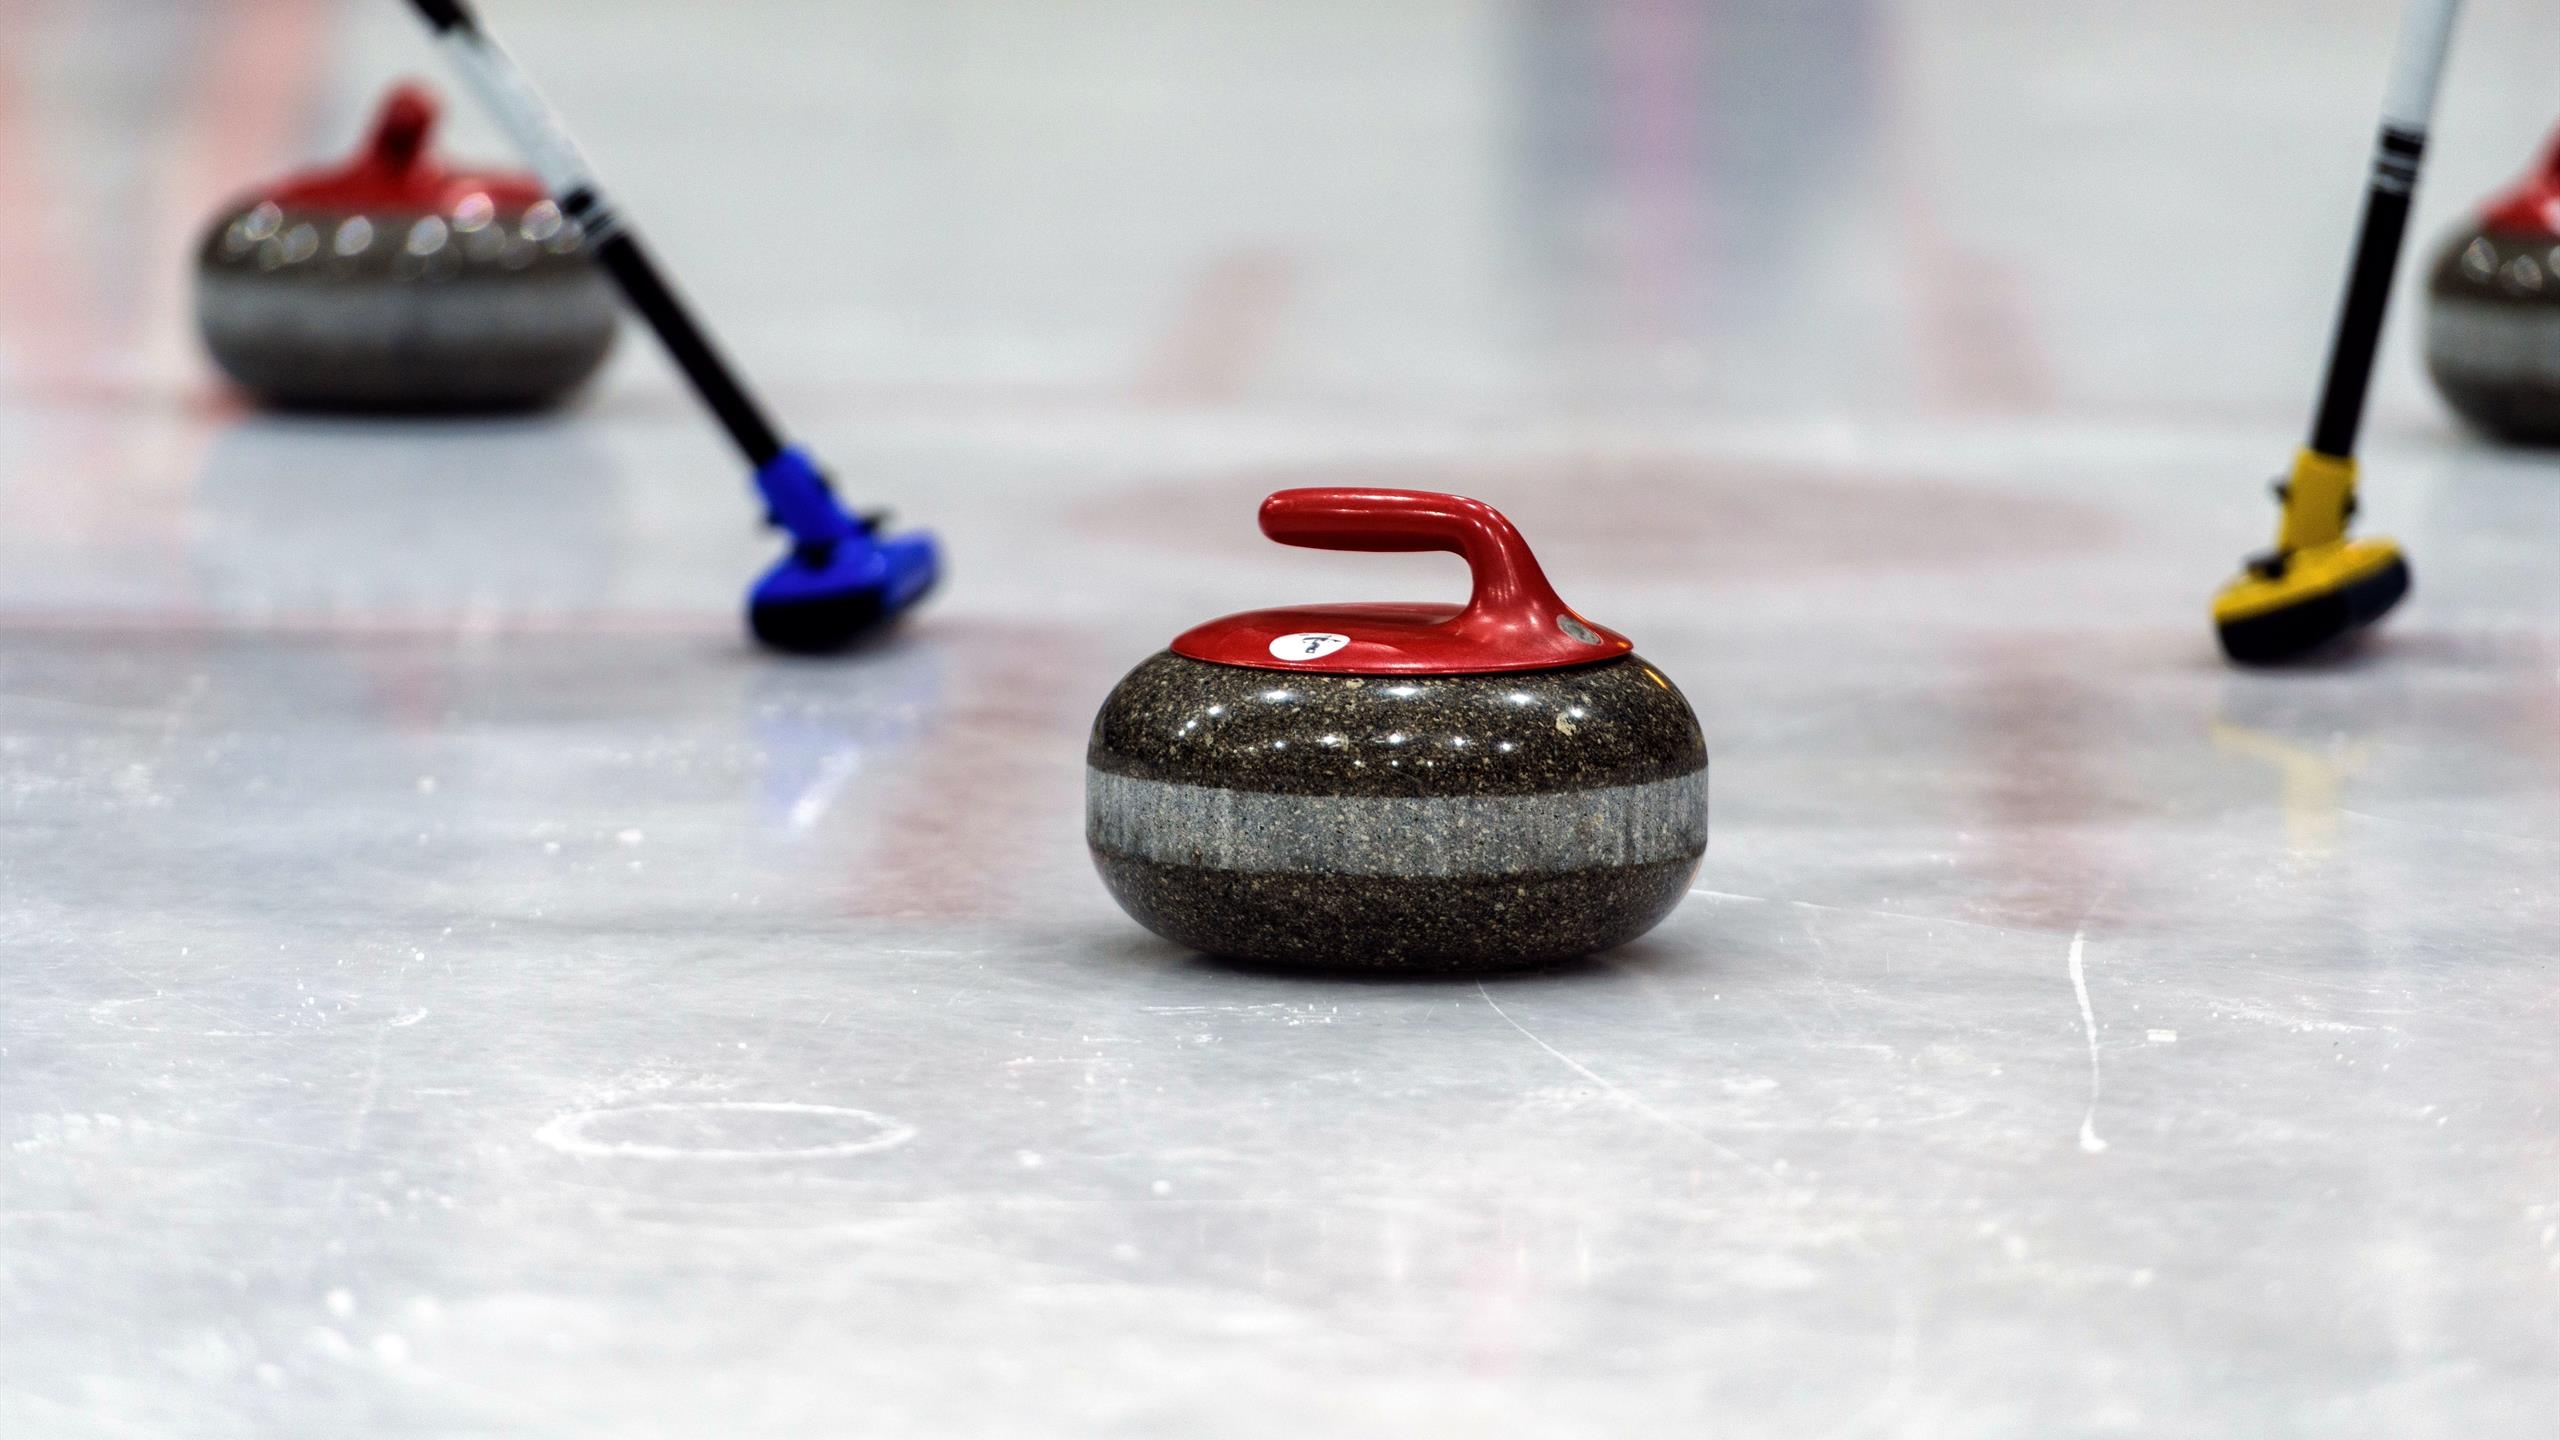 Curling: Heavy, polished granite rocks and brooms - the primary equipment for an official Olympic winter sport. 2560x1440 HD Wallpaper.